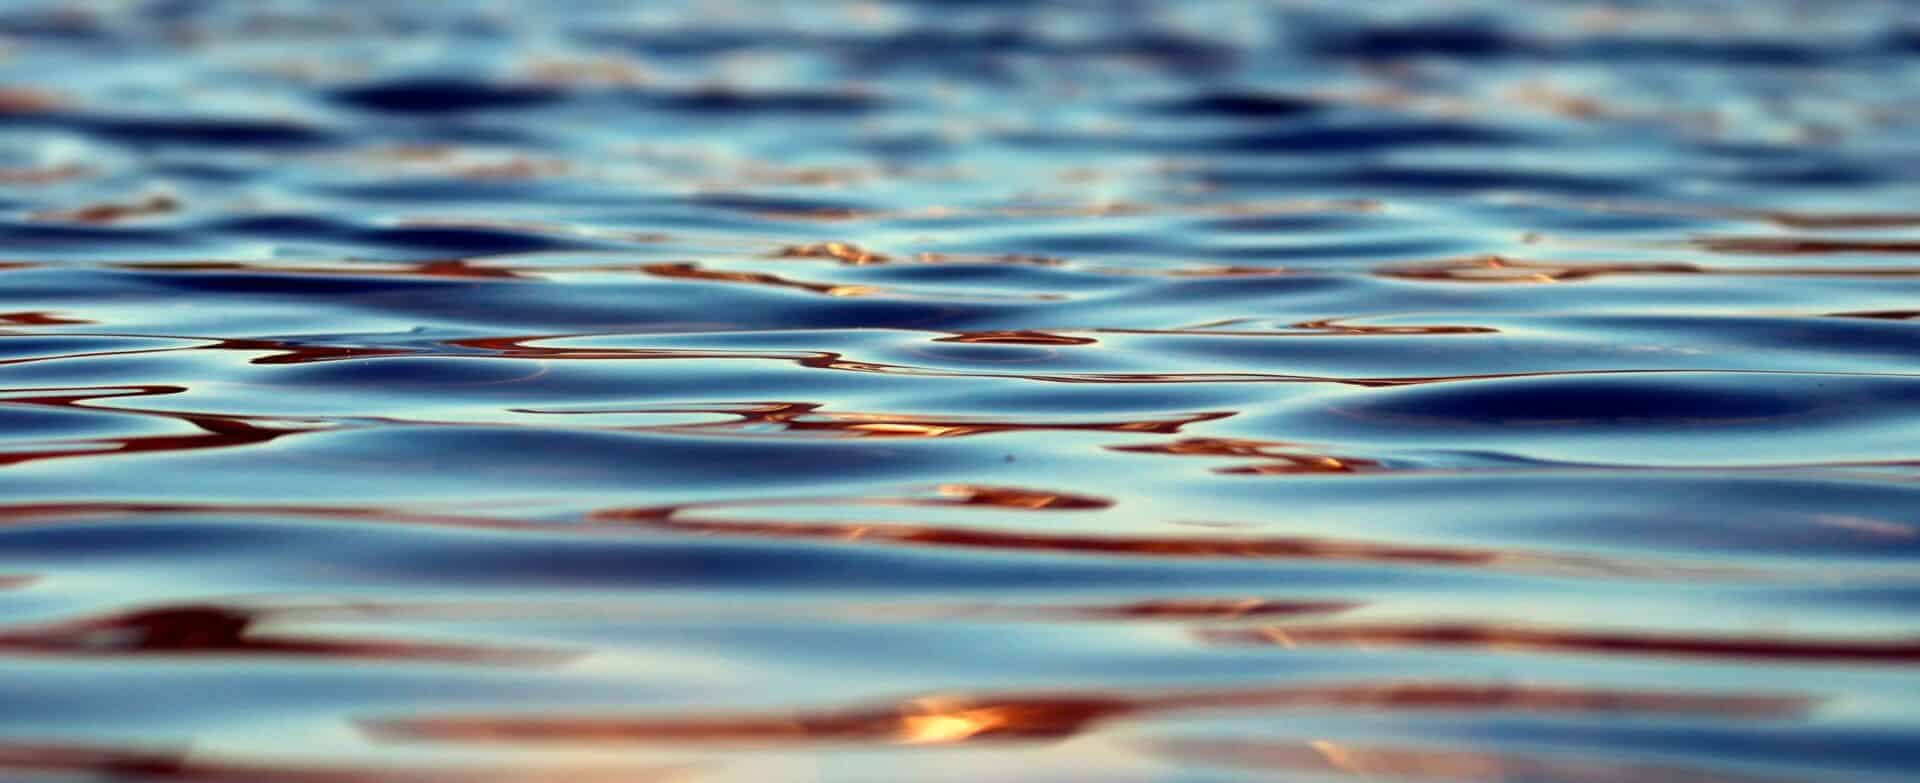 Blurry close up of rippling water.